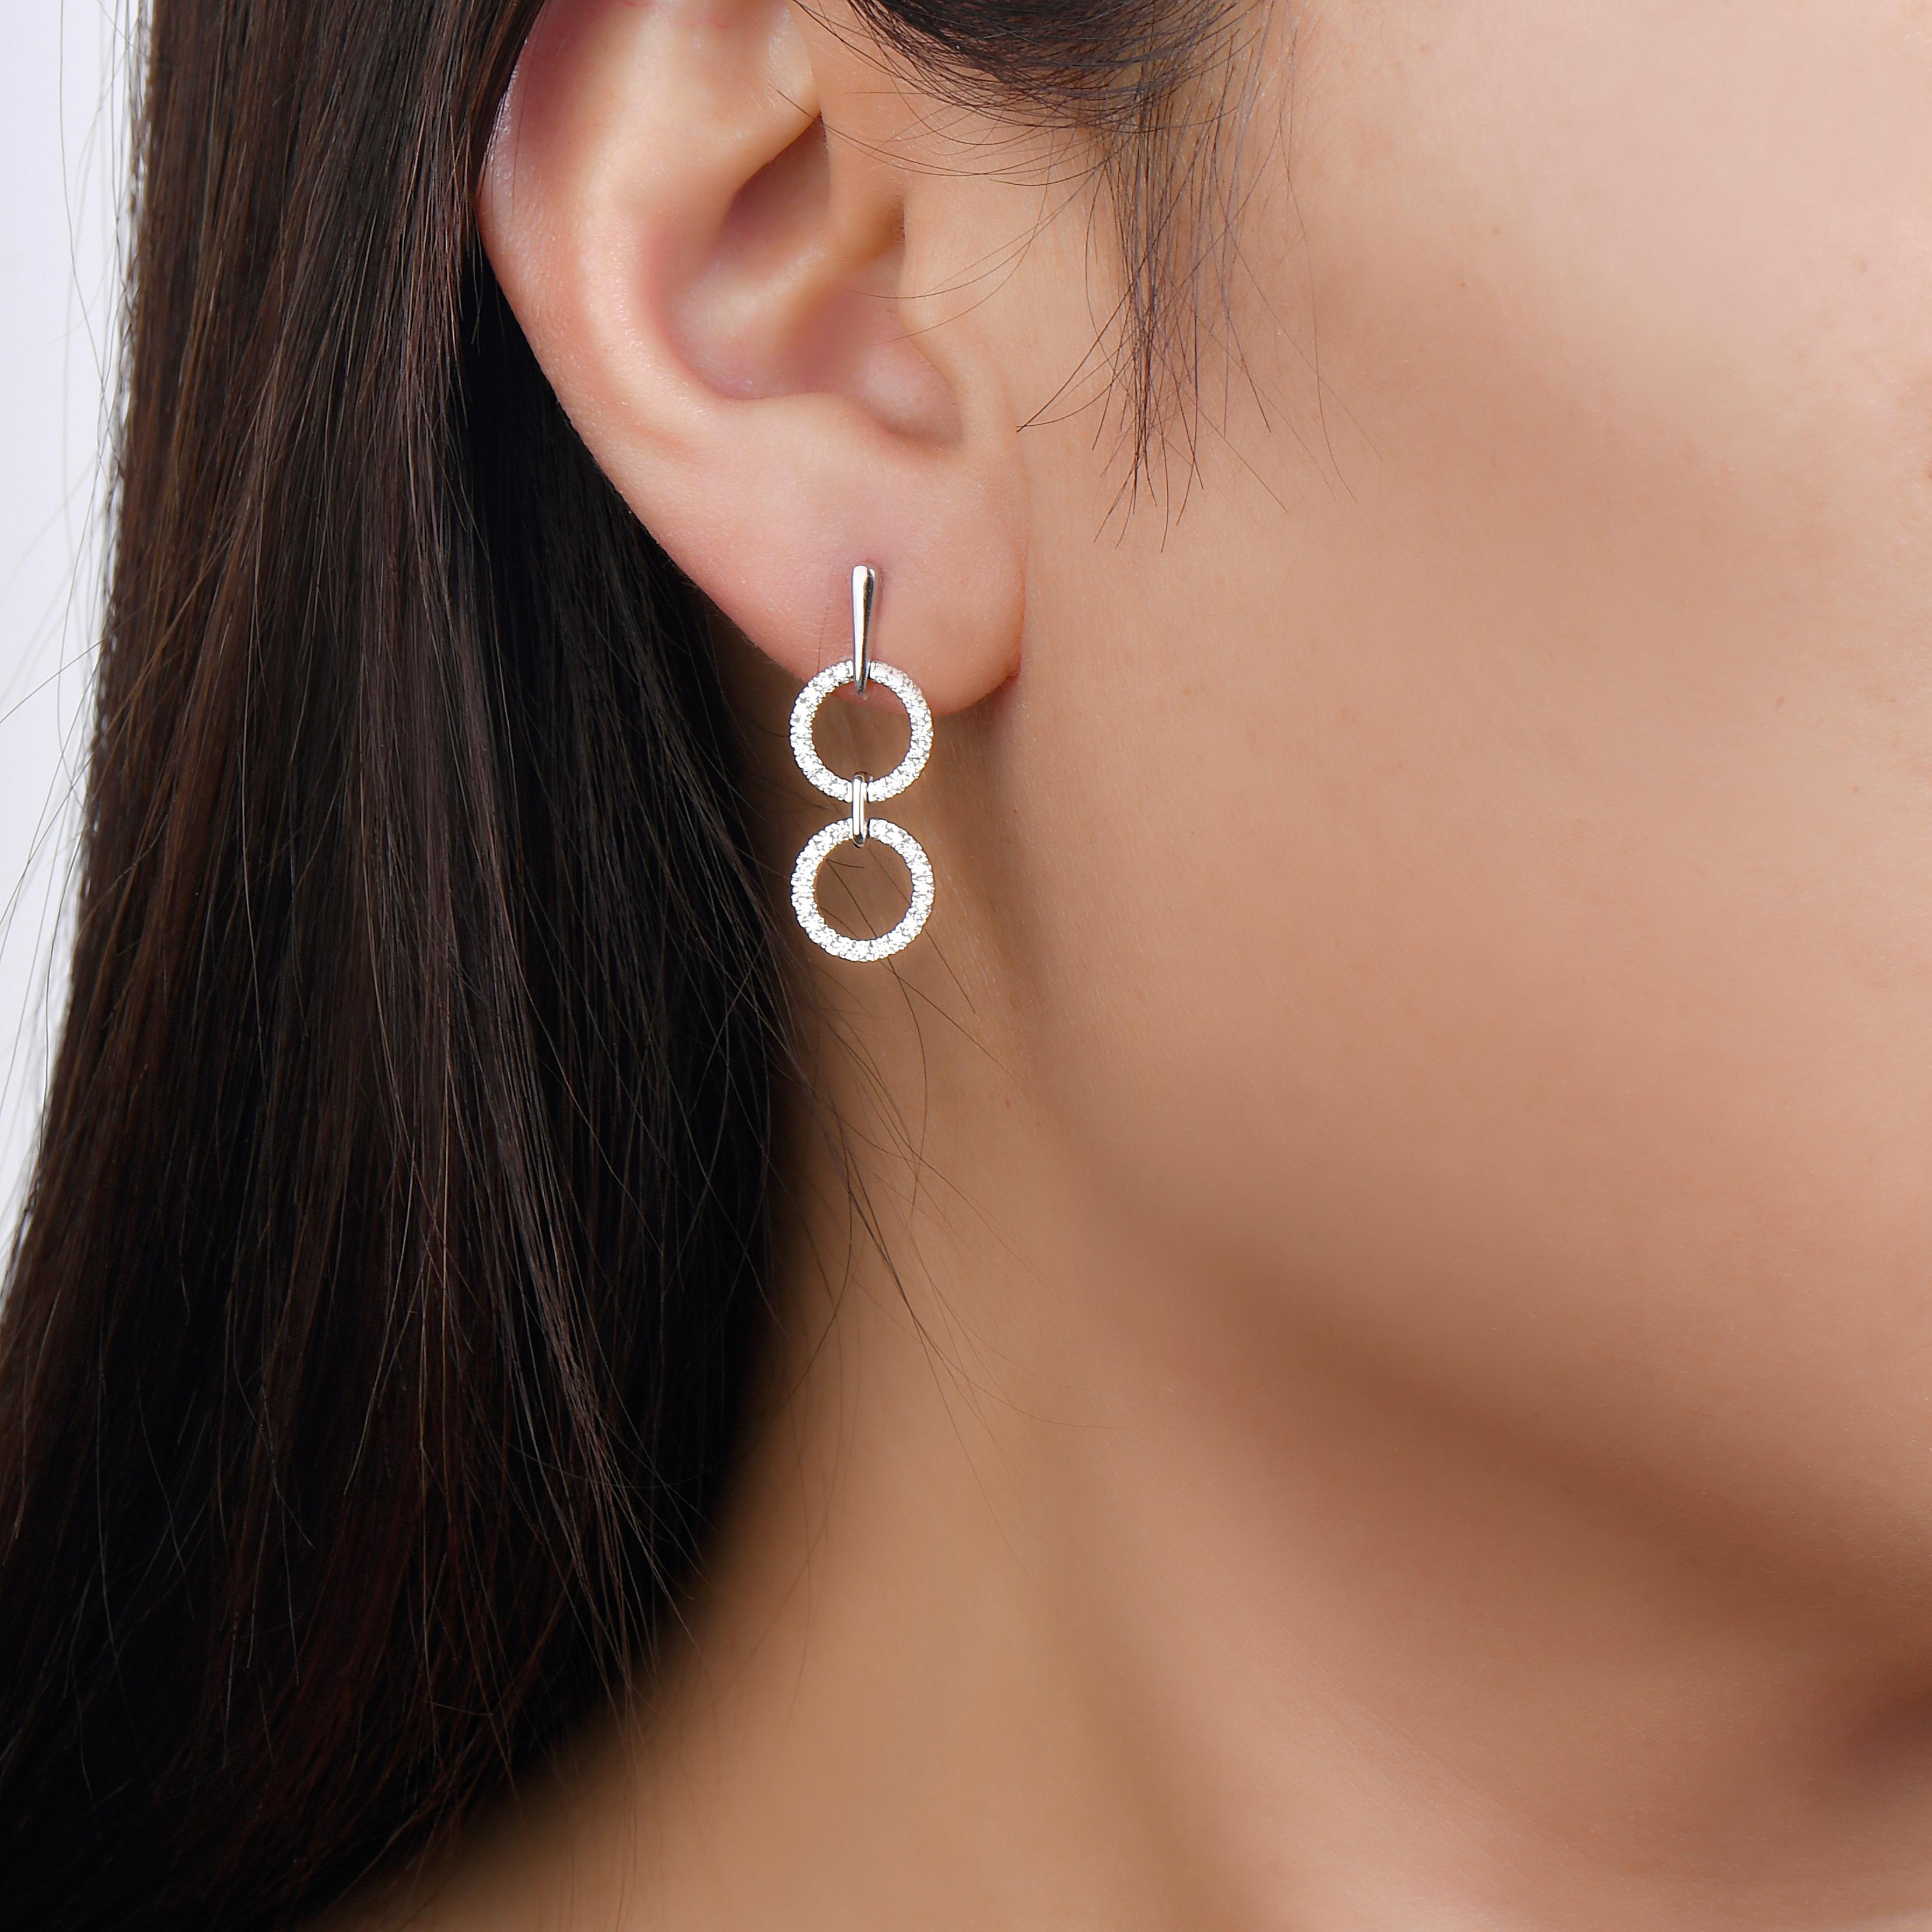 A different take on dangling earrings, these geo art earrings have more of a hang than a dangle. However, that does not make them any less stunning. The diamond dangling earrings in 14K white gold are perfect to gift someone you share a special